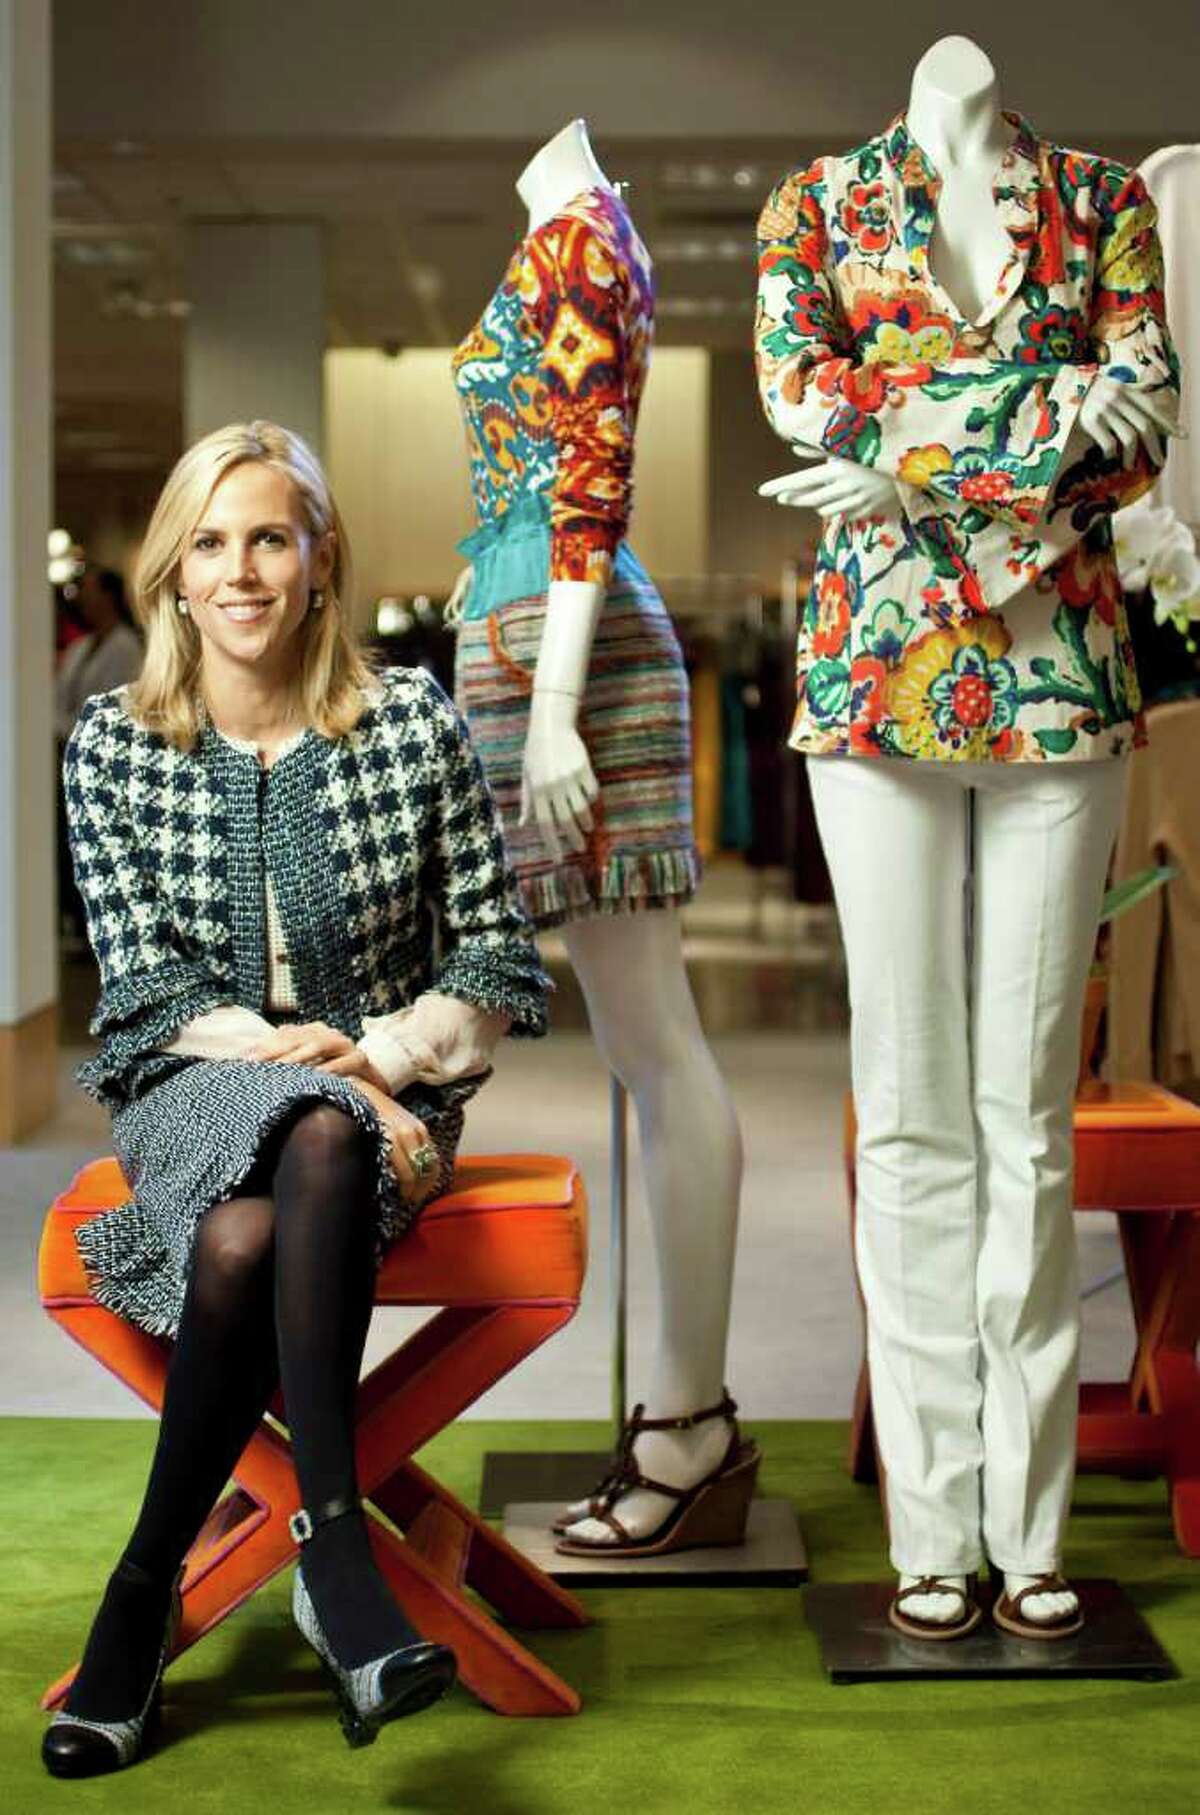  "If I wasn't a good mom, I wouldn't be a good businessperson," Tory Burch says. The fashion designer thinks women support her brand because she's one of them.